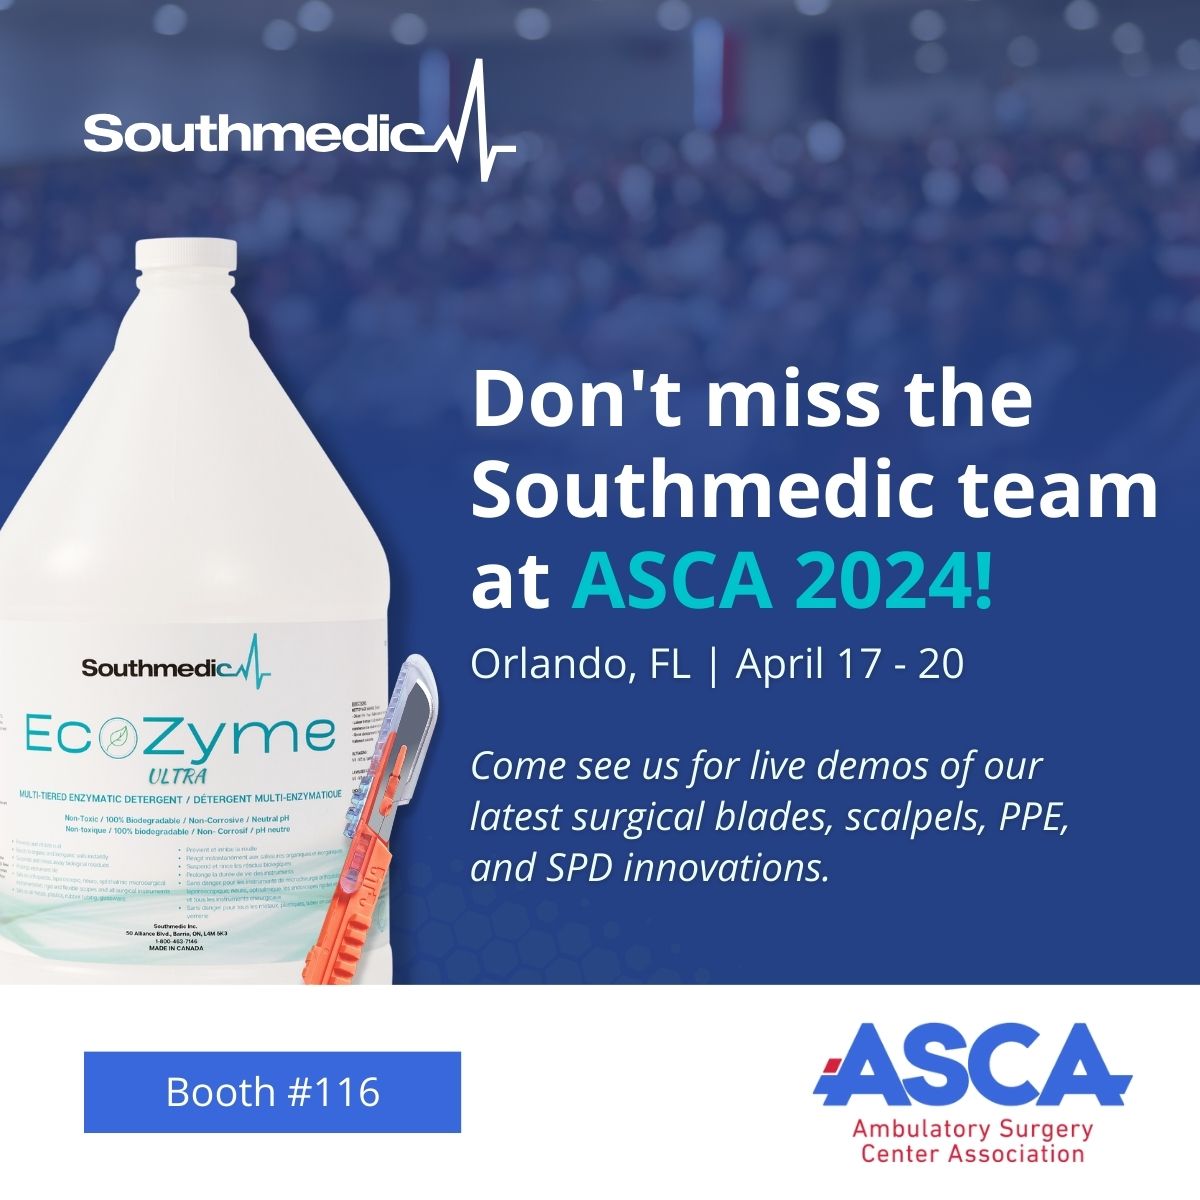 We look forward to seeing you in Orlando!

hubs.li/Q02t1z7j0

#ASCA2024 #ASCAConf #SterileProcessing #SPD #InnovationInHealthcare